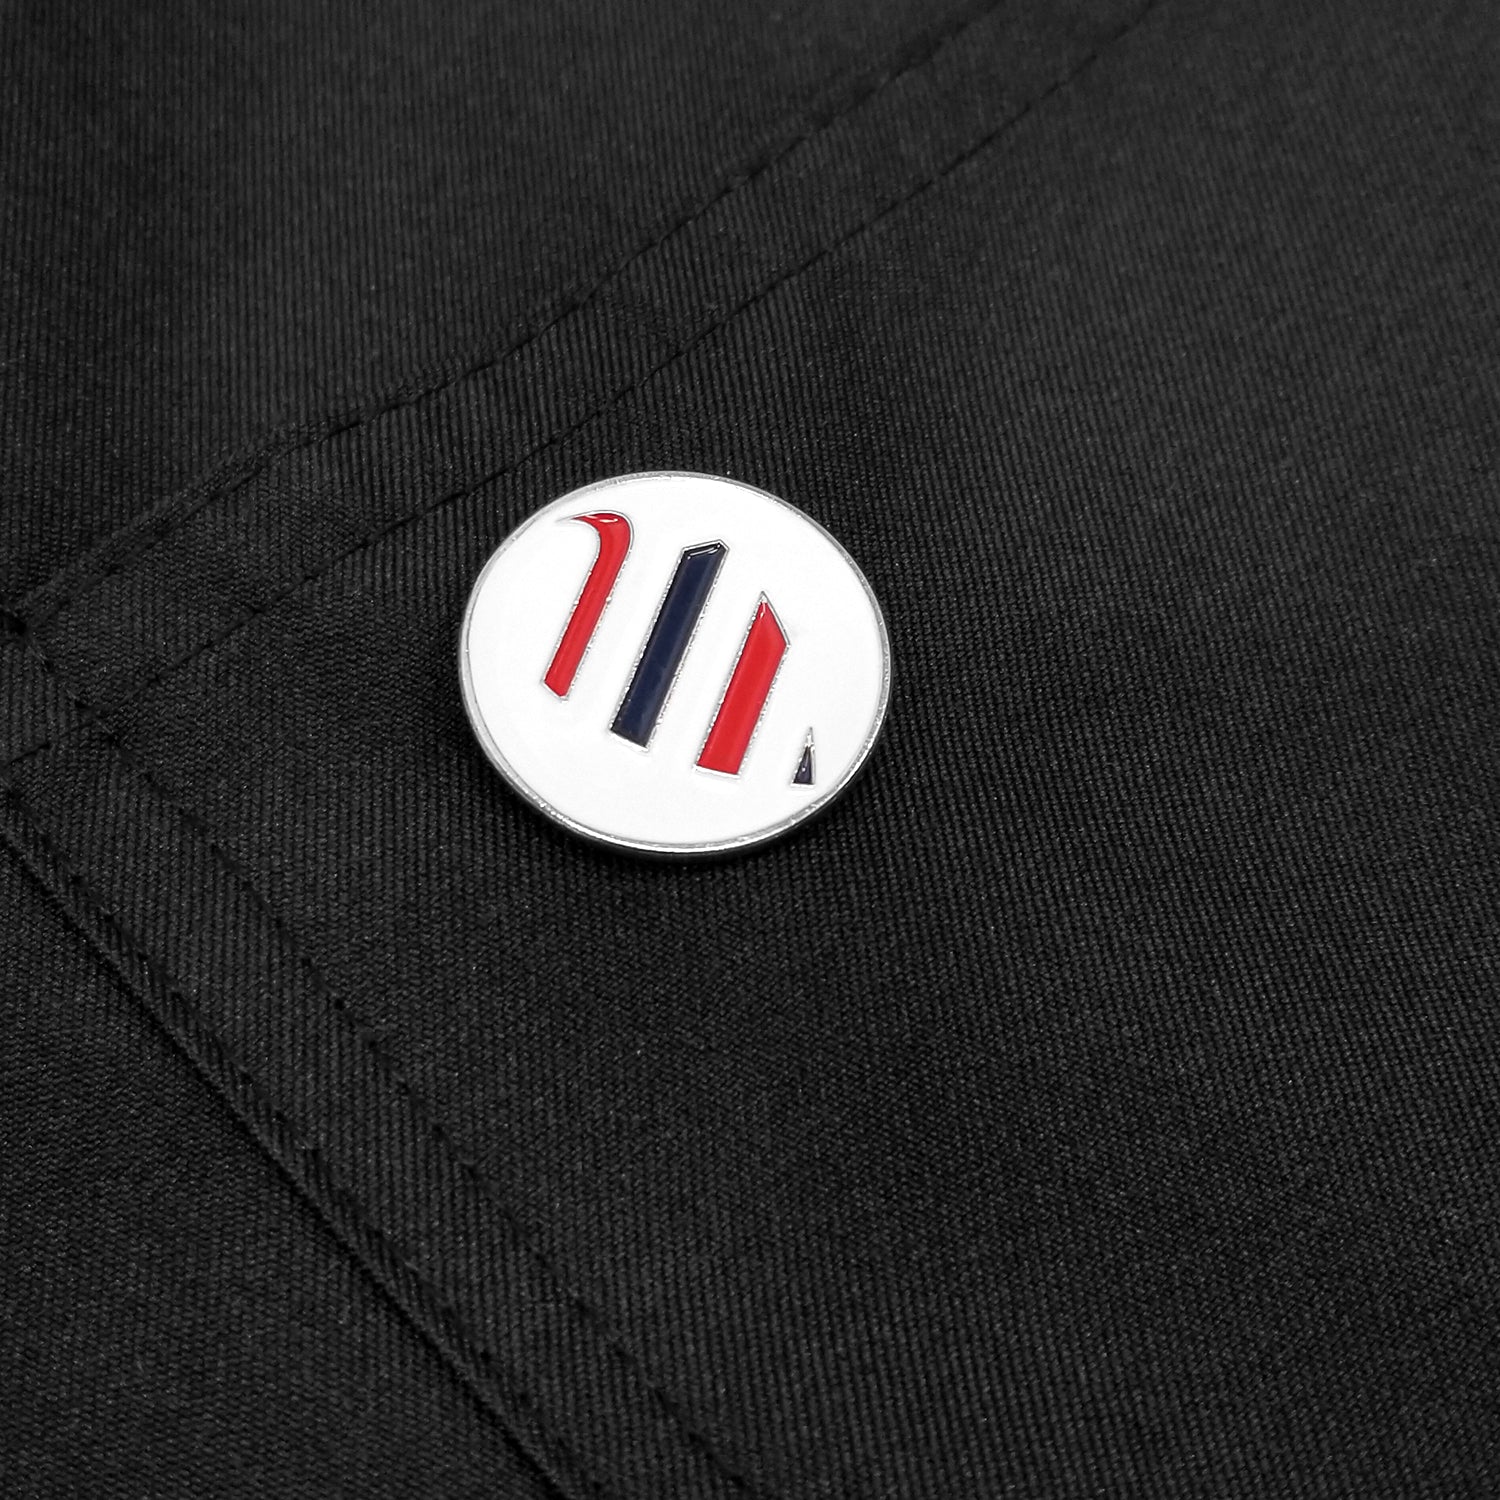 The Barber Pin